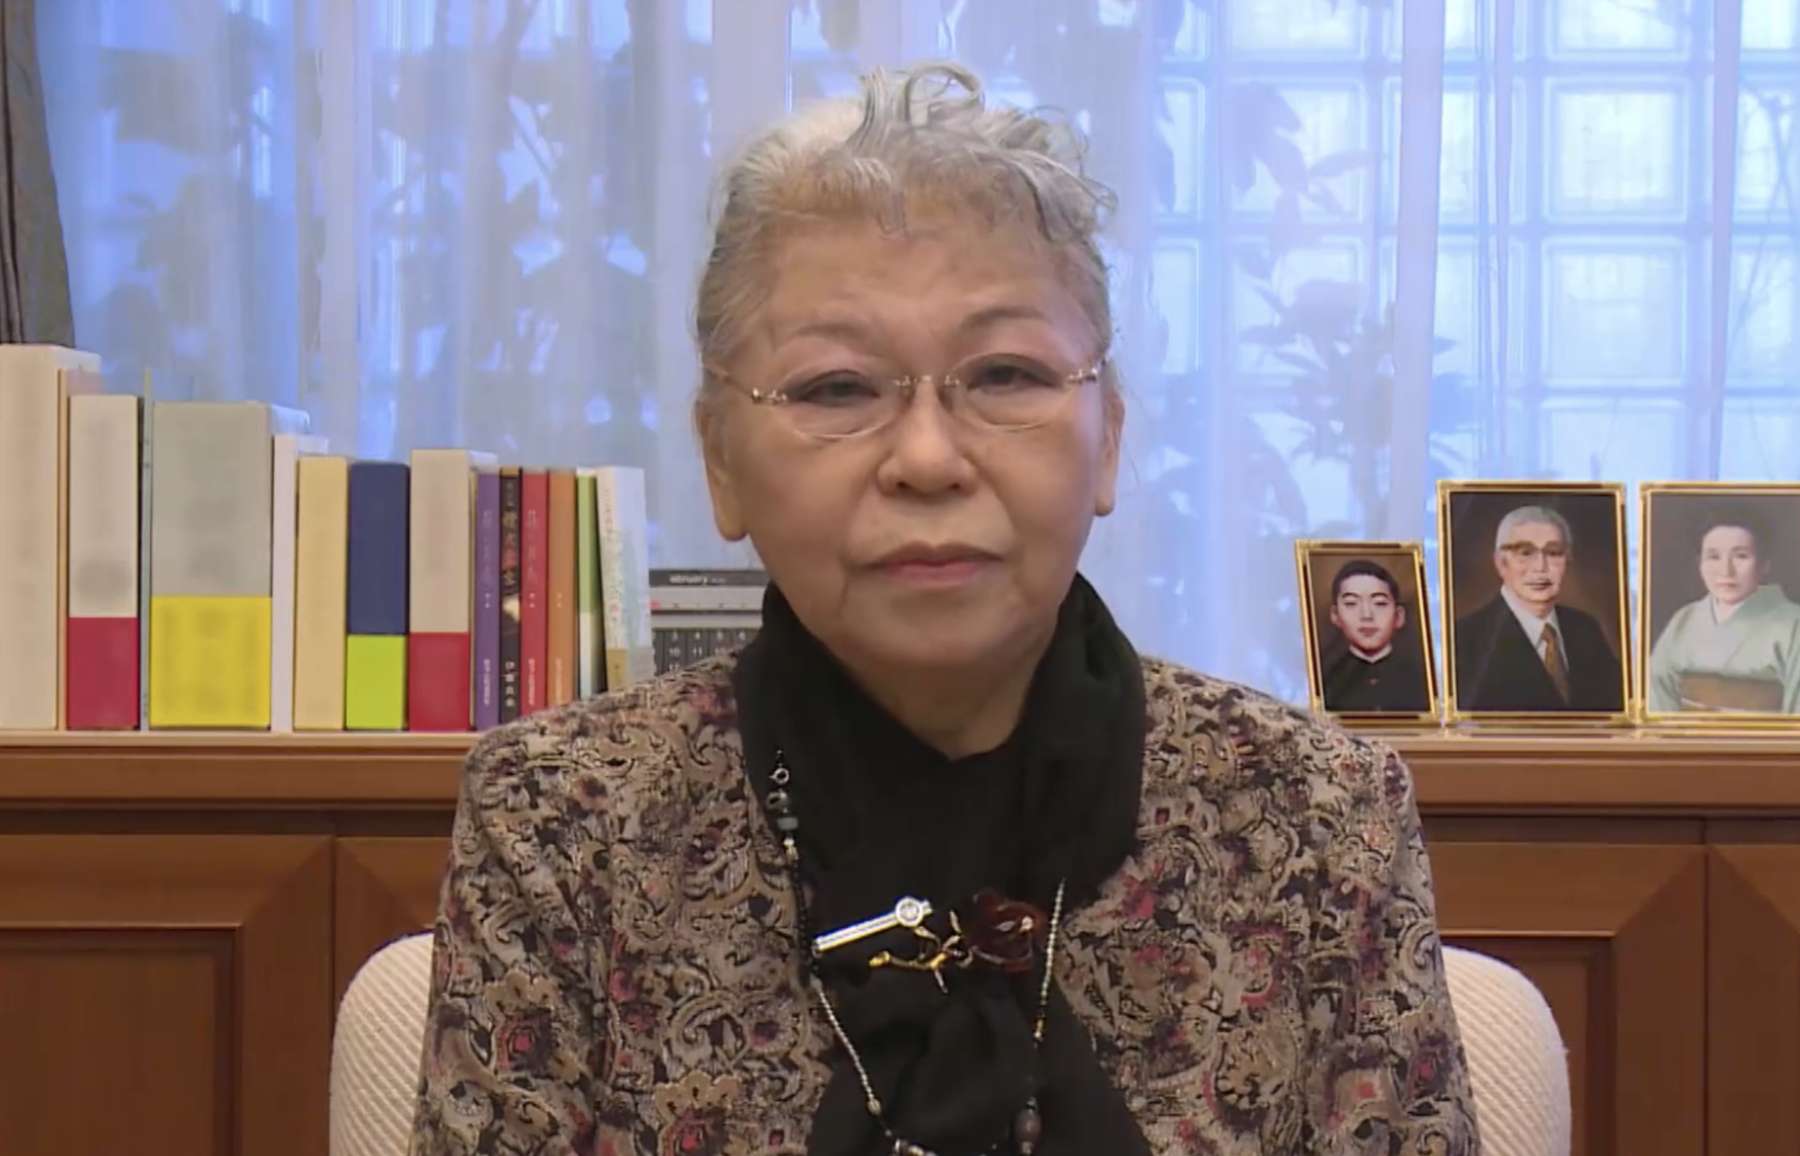 Her Holiness Shinso Ito, wearing spectacles, a patterned blouse with a black scarf, sitting in front of a window with a shelf displaying photos, looks directly into the camera.